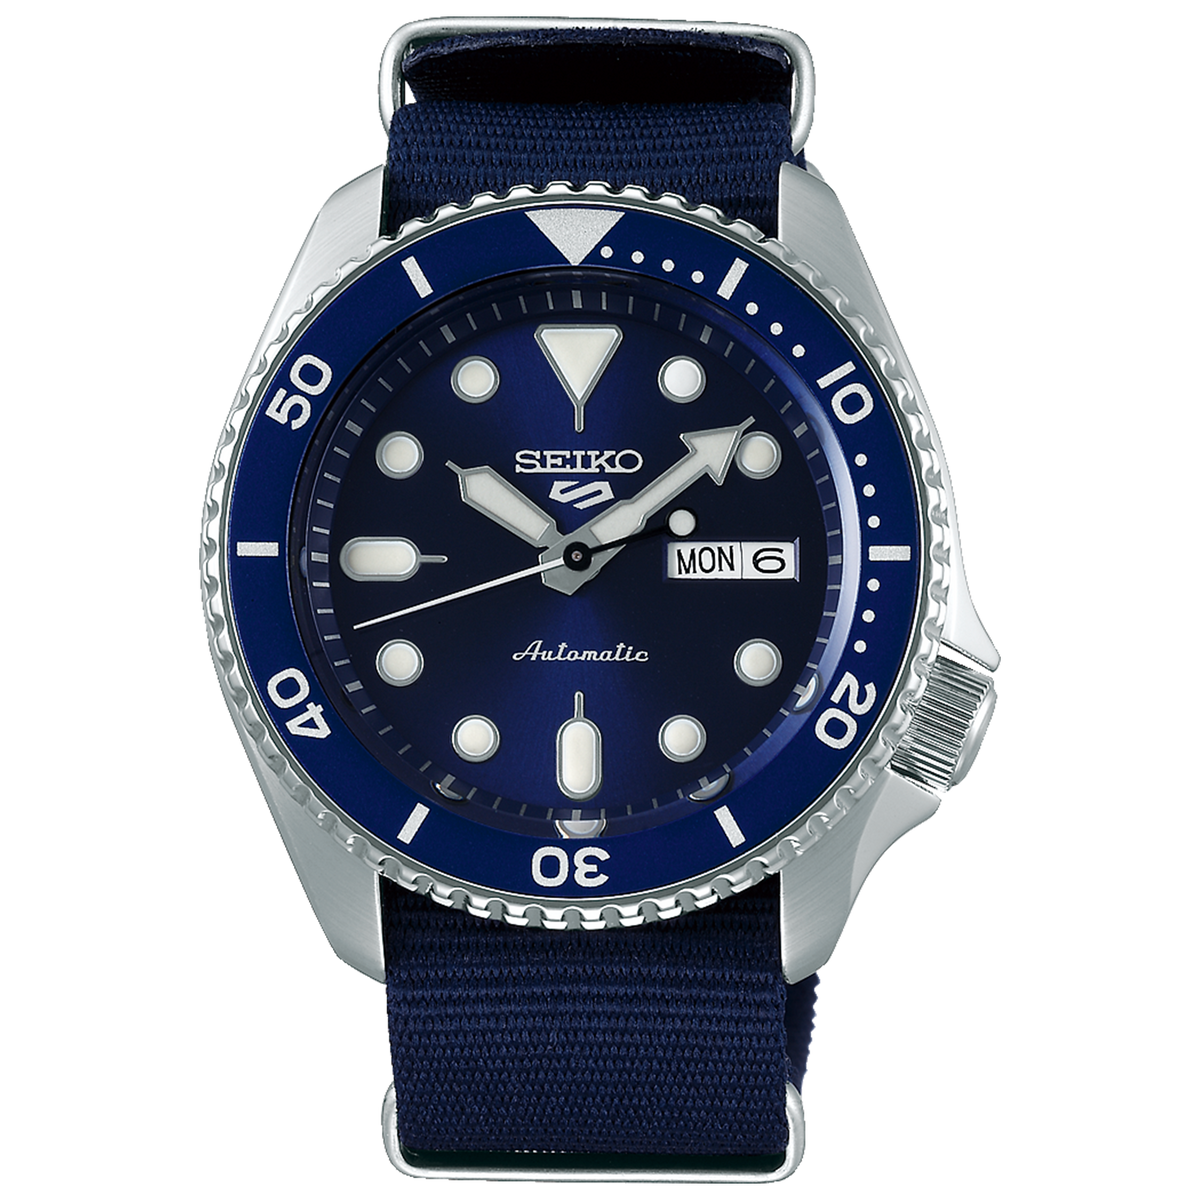 Seiko 5 Sport - Sport Series with Blue Dial